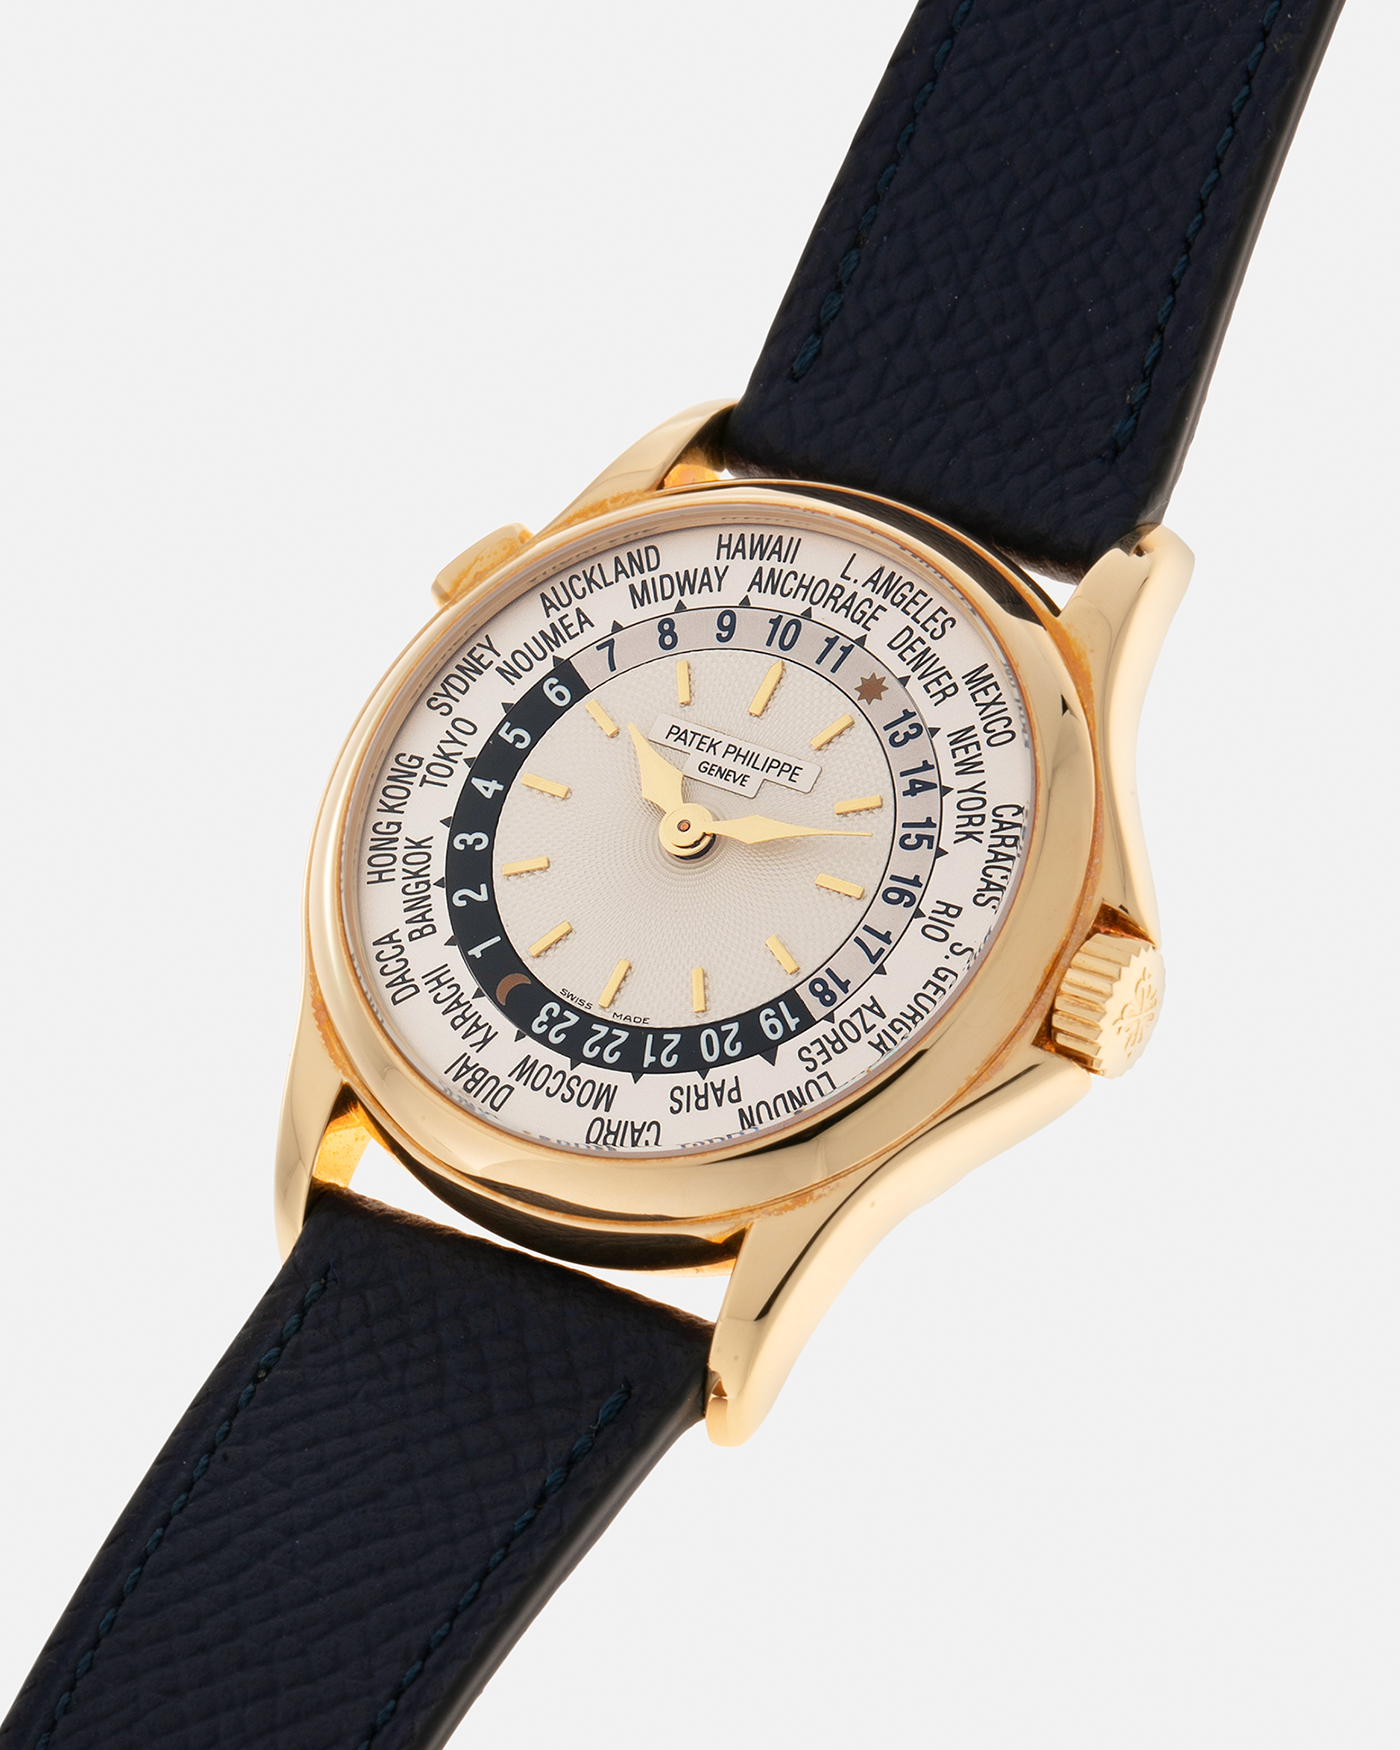 Brand: Patek Philippe Year: 2000s Model: World Time Reference Number: 5110J Material: 18-carat Yellow Gold Movement: Patek Philippe Cal. 240 HU Micro-Rotor, Self-Winding Case Diameter: 37mm Lug Width: 20mm Bracelet: Nostime Navy Blue Textured Calf Leather Strap with Signed 18-carat Yellow Gold Deployant Clasp, Patek Philippe Brown Alligator Leather Strap (Used)